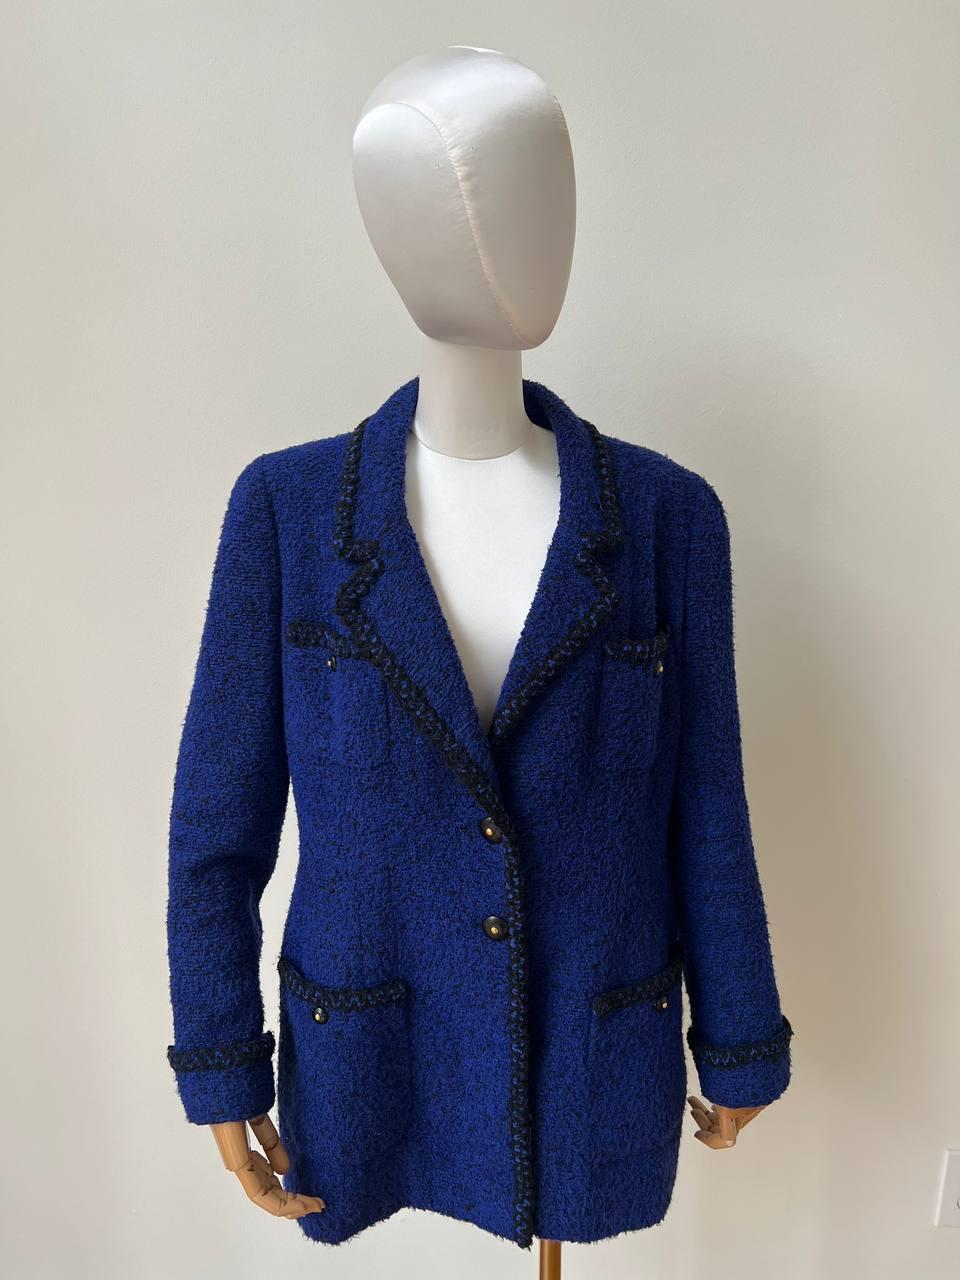 Vintage Blue Tweed Double-breasted Chanel Jacket, 1995 6